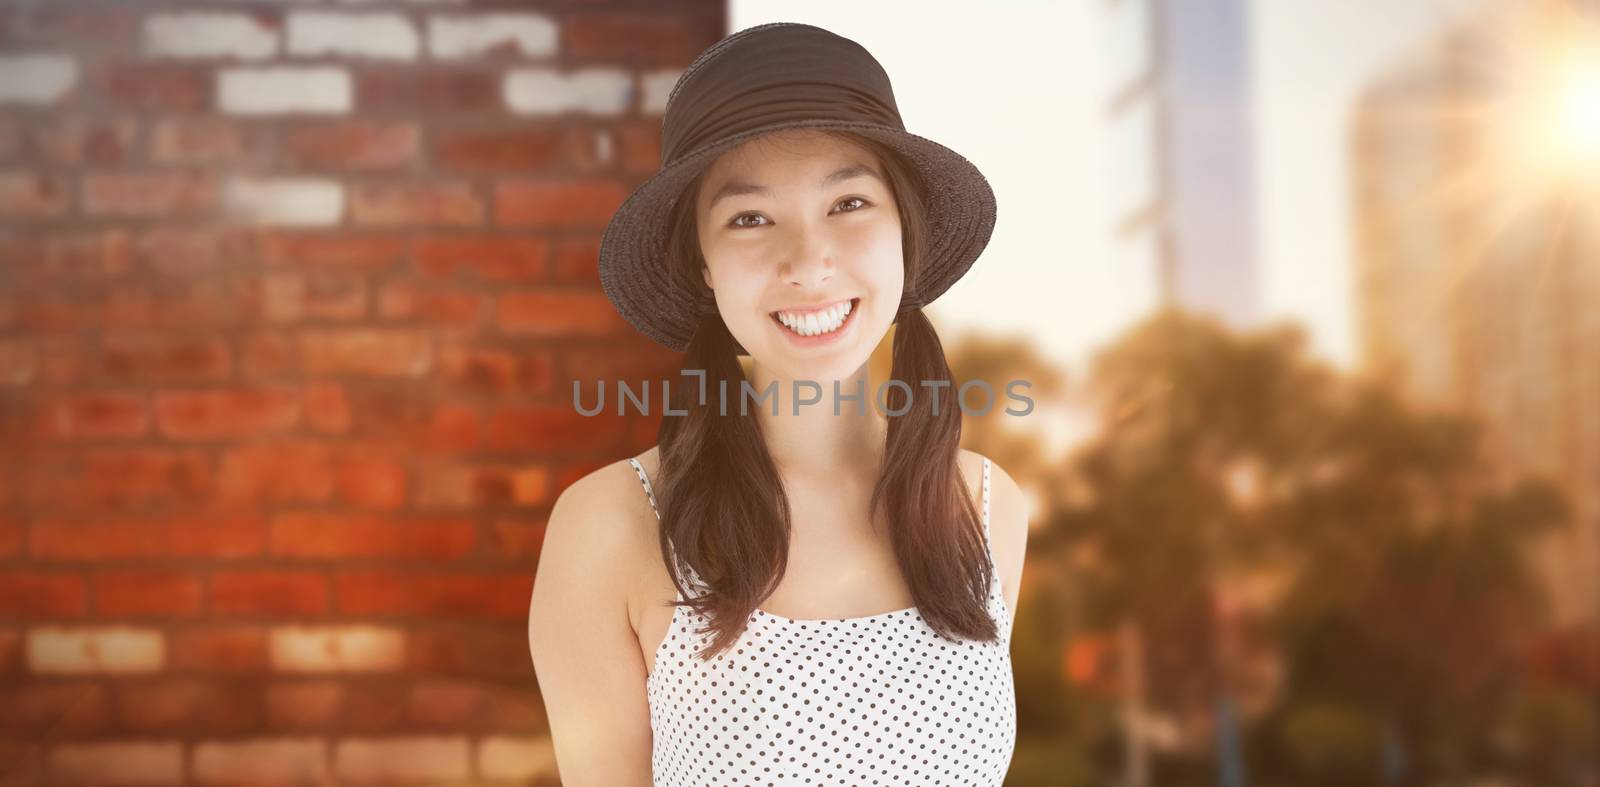 Composite image of cheerful woman with a polka dot dress and hat by Wavebreakmedia